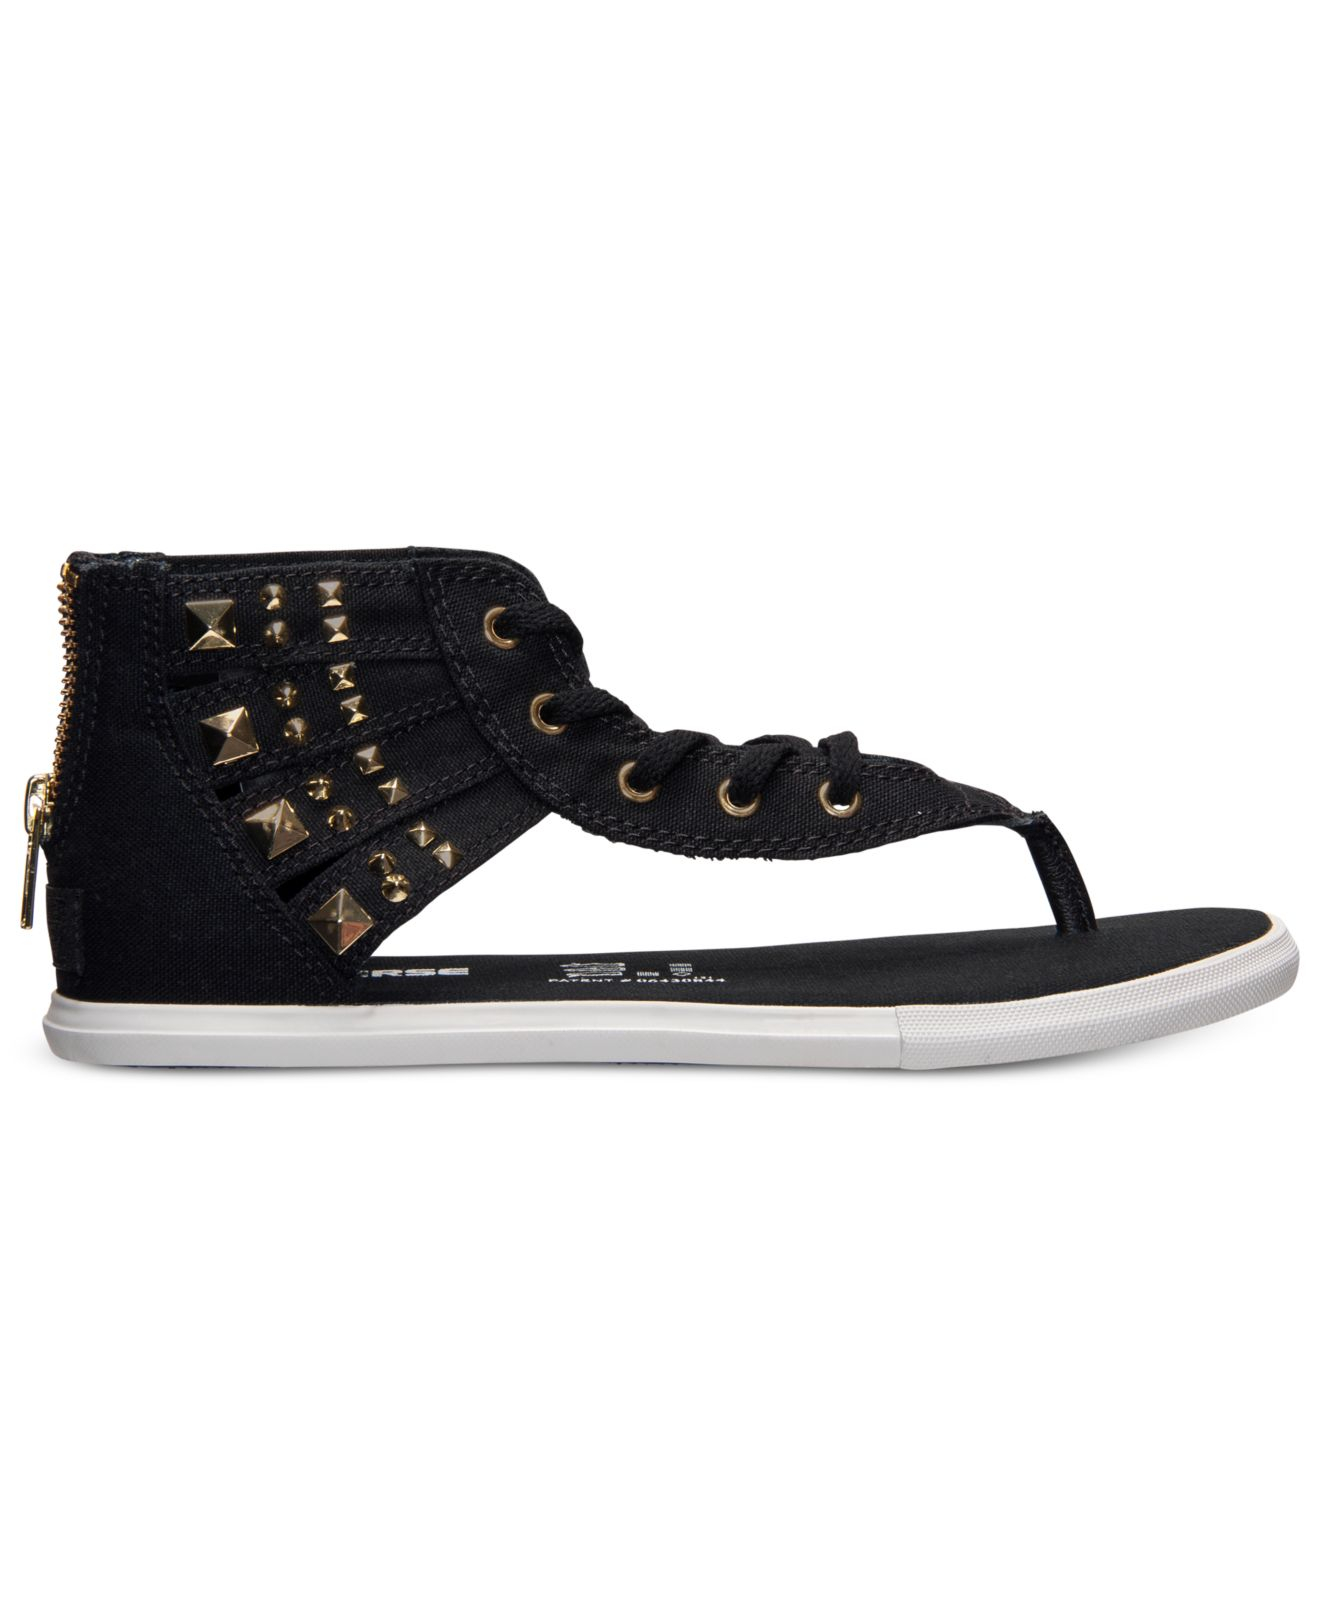 Converse Women'S Chuck Taylor Gladiator Thong Sandals From Finish Line in  Black - Lyst